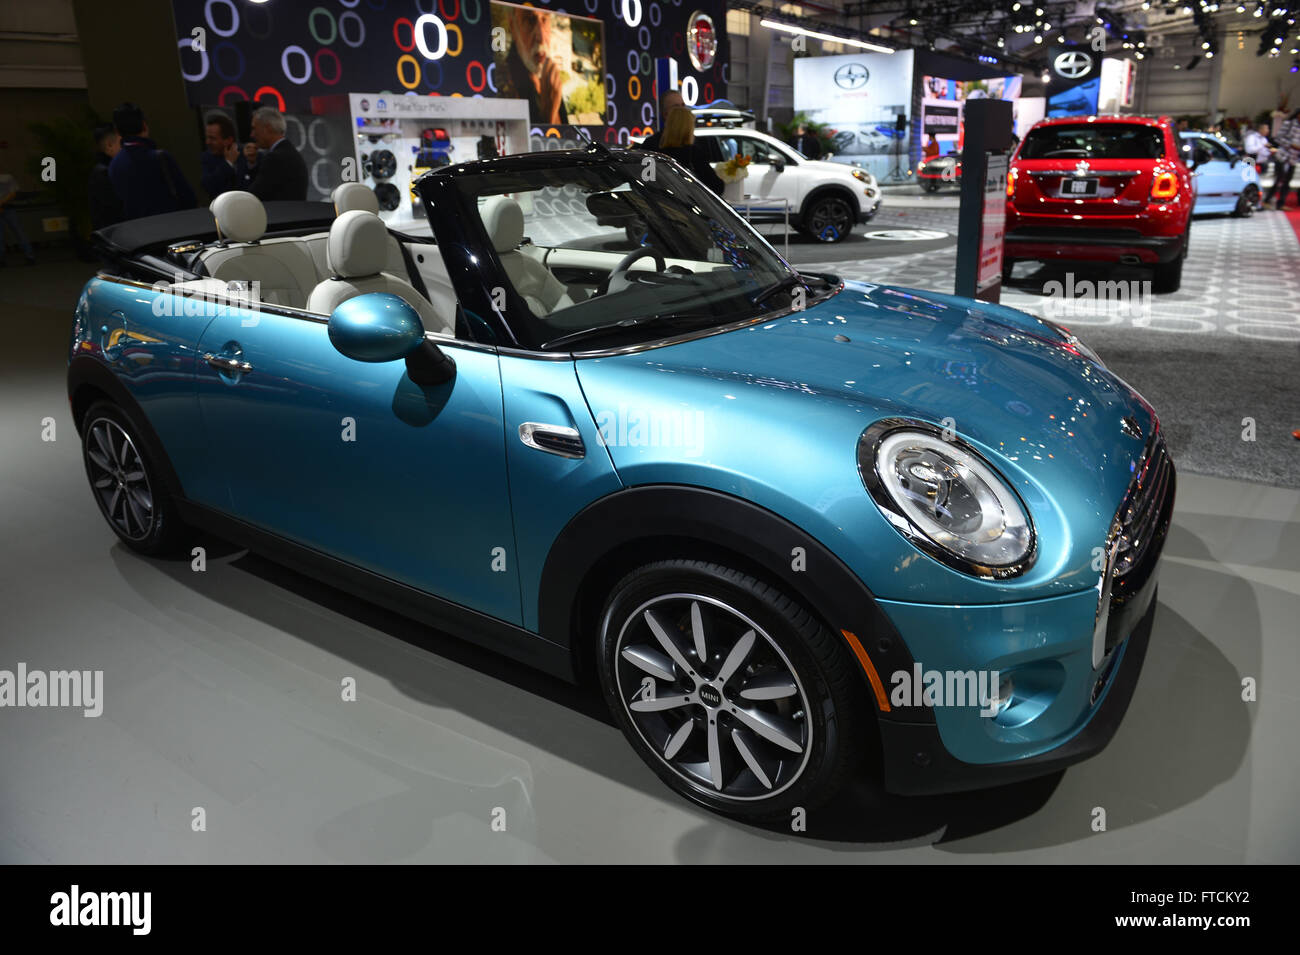 March 23, 2016 - Manhattan, New York, United States - A blue MINI John Cooper Works Convertible makes its world premiere at the New York International Auto Show 2016, at the Jacob Javits Center. This was Press Preview Day one of NYIAS, and the Trade Show will be open to the public for ten days, March 25th through April 3rd. (Credit Image: © Ann Parry via ZUMA Wire) Stock Photo